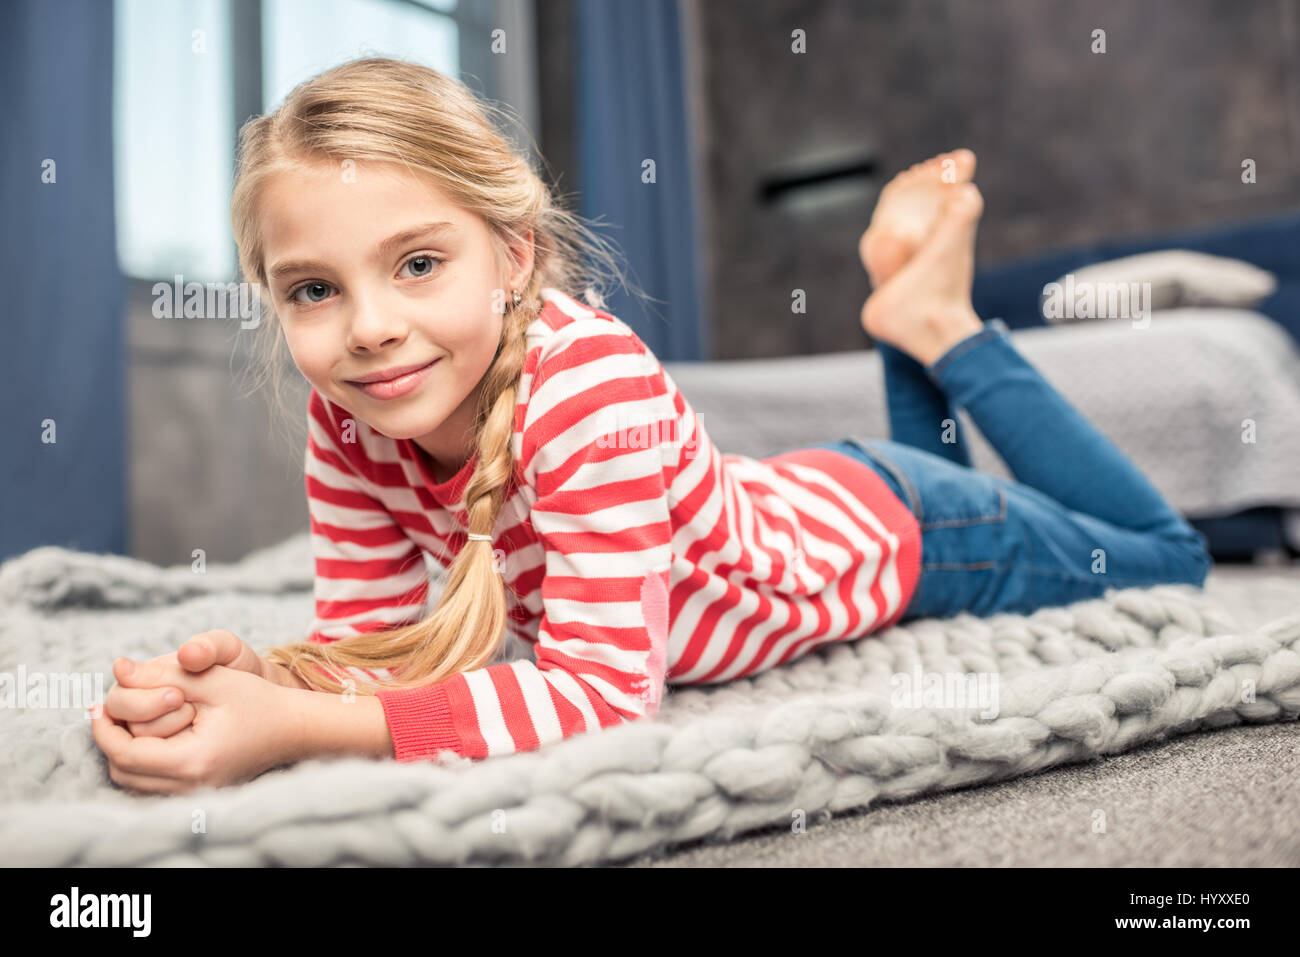 Pretty little girl lying on floor and smiling at camera Stock Photo - Alamy